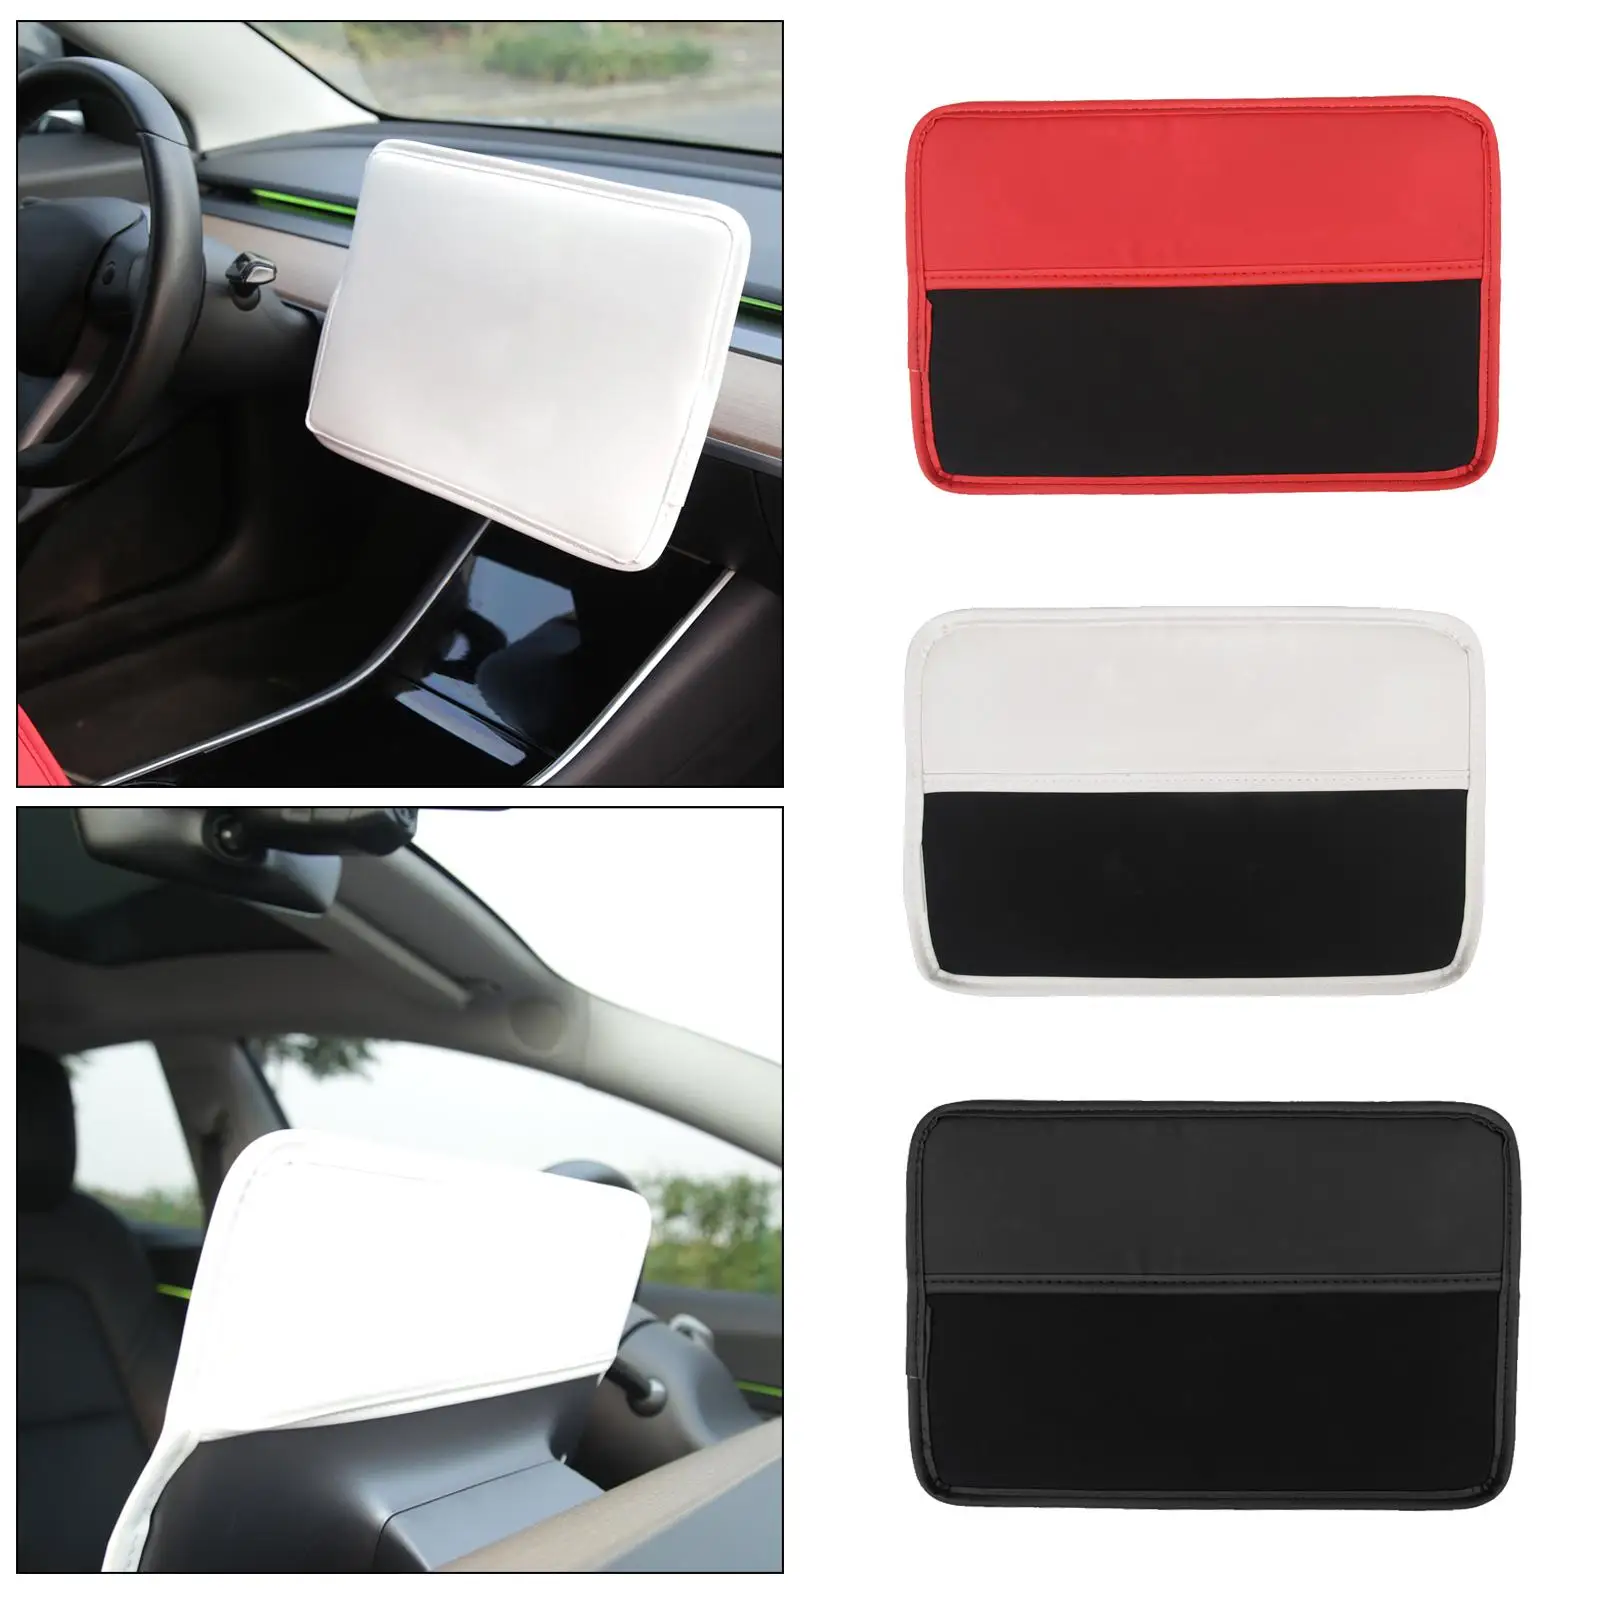 Navigation Cover Sleeve Sunshade fits for DIY